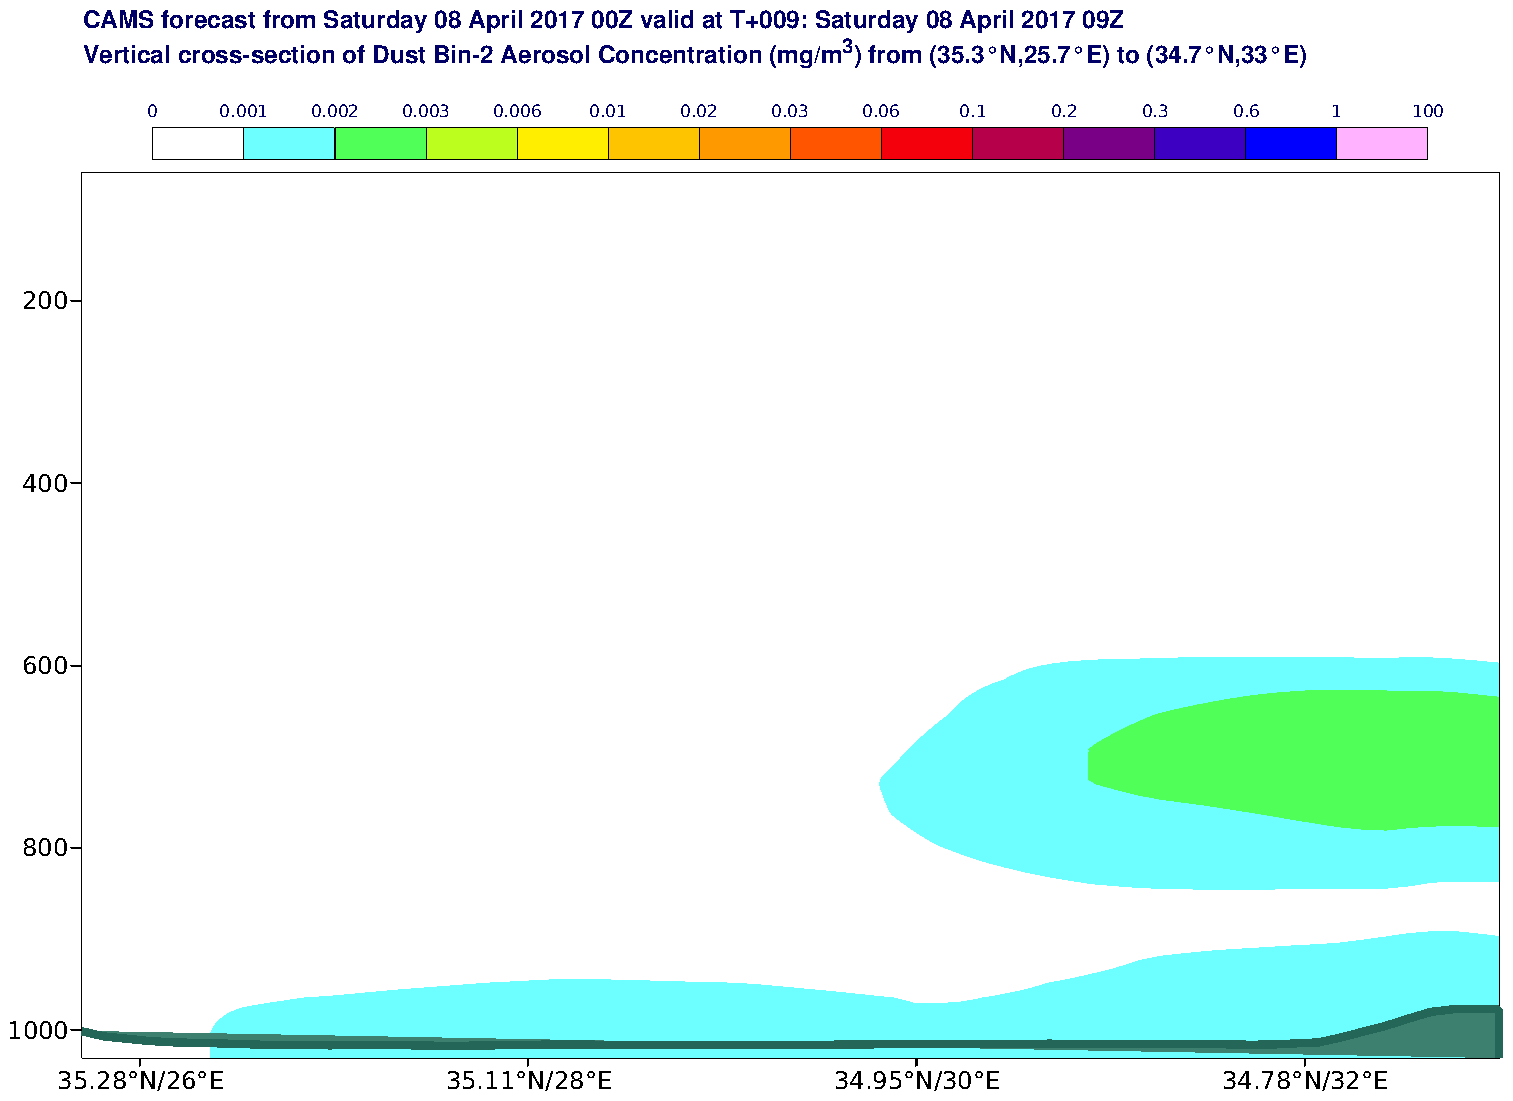 Vertical cross-section of Dust Bin-2 Aerosol Concentration (mg/m3) valid at T9 - 2017-04-08 09:00